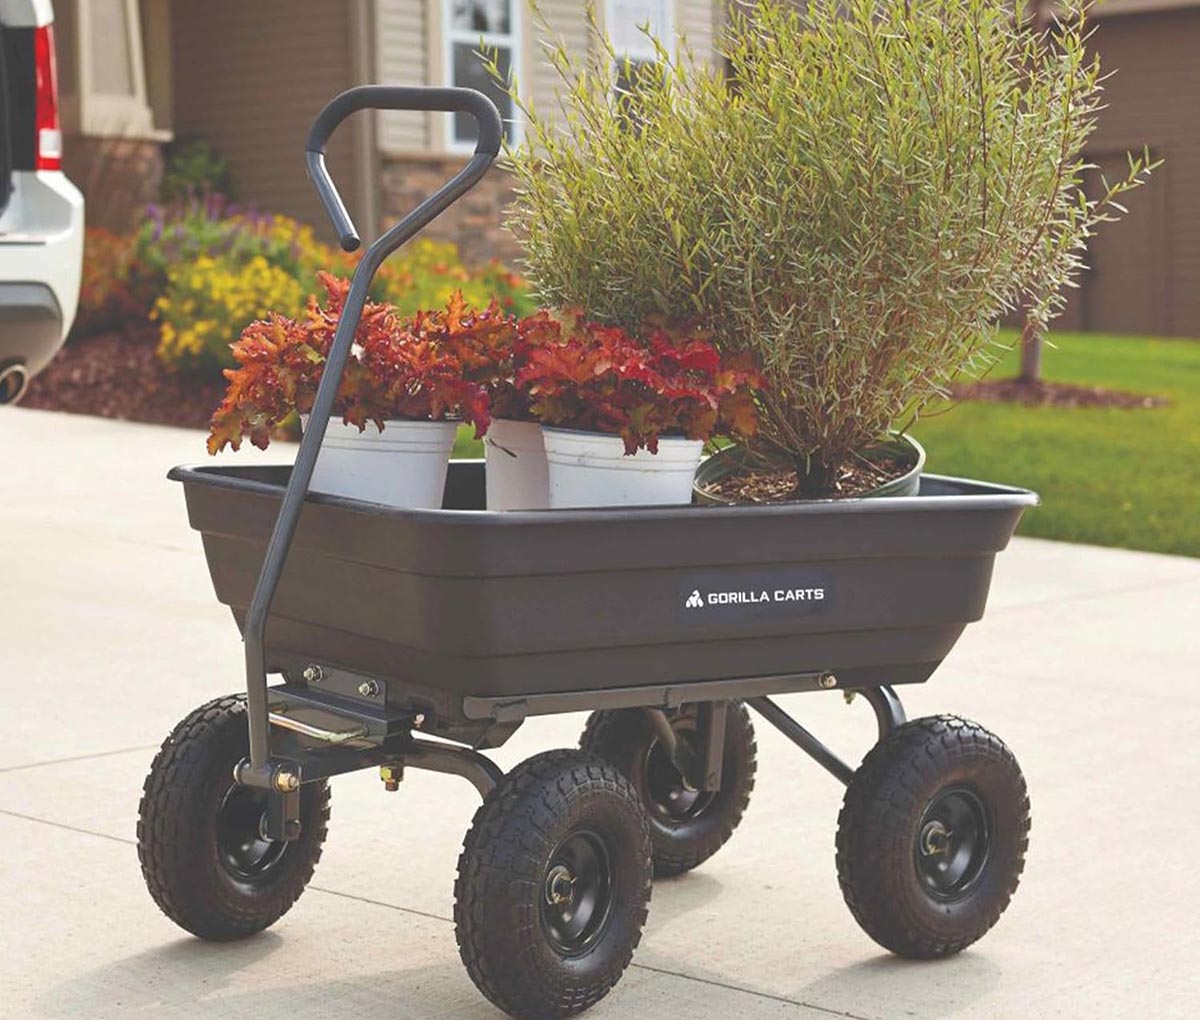 The Best Gift for a Plant Whisperer This Mother’s Day Gorilla Carts Poly Garden Dump Cart